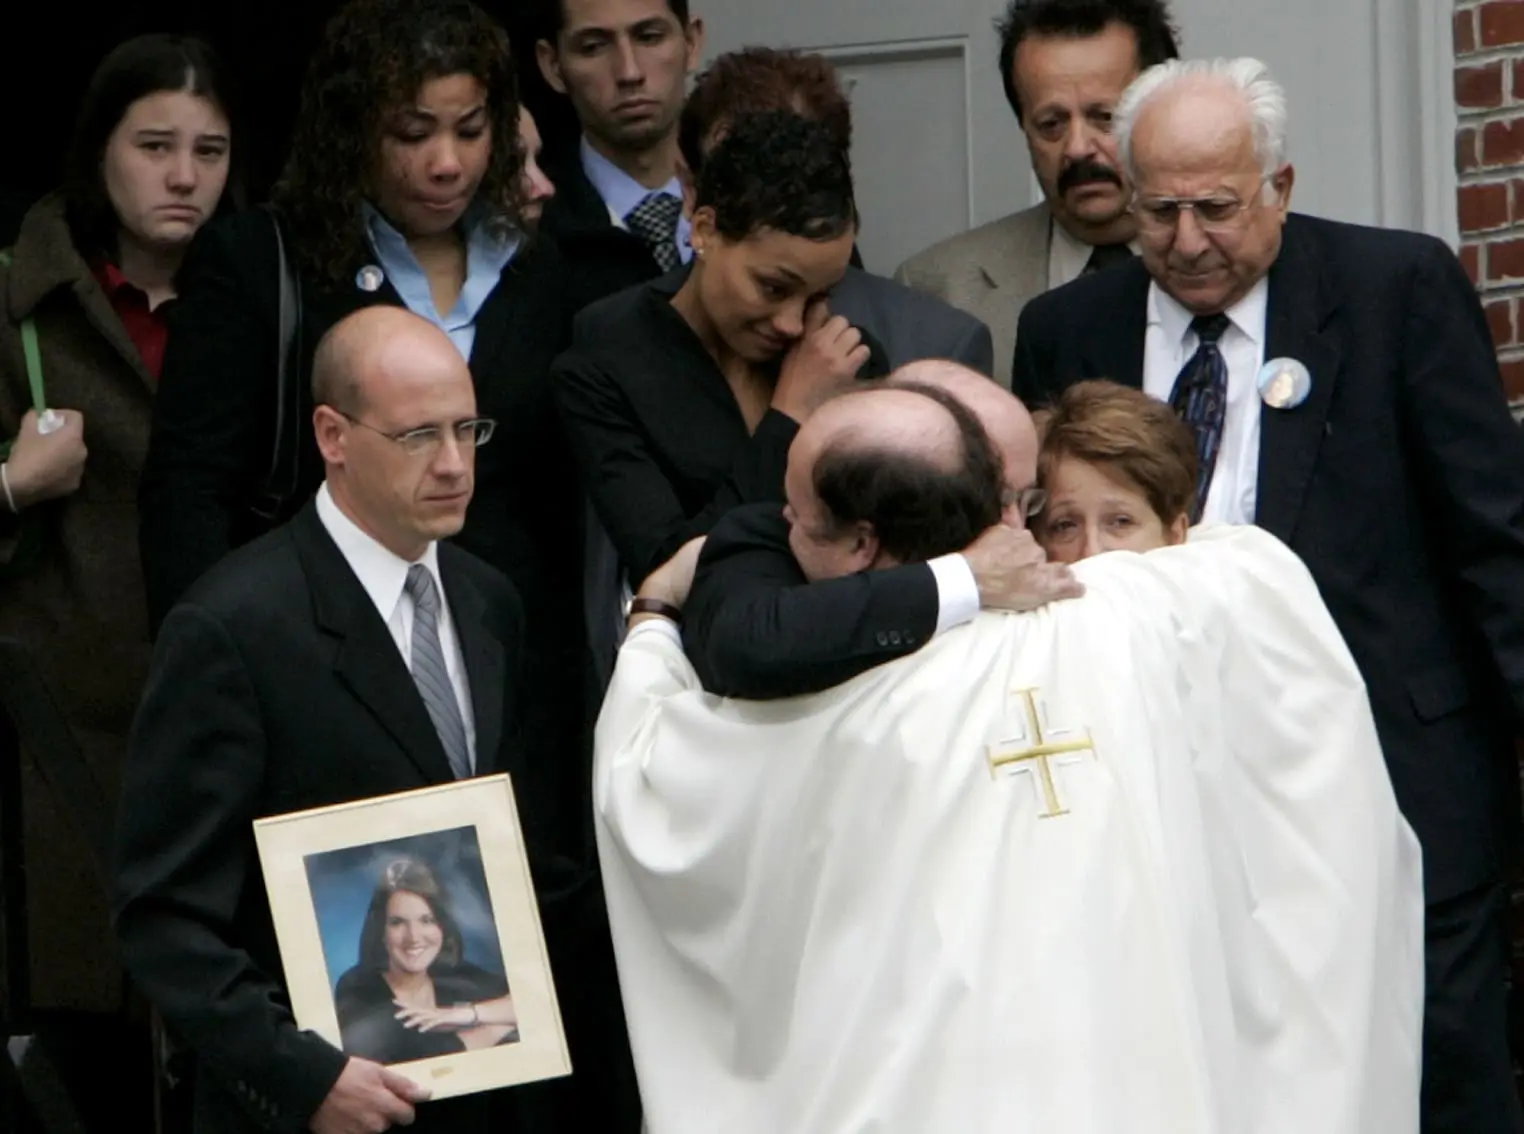 The pastor of St. Johns Church hugs Victoria Snelgroves parents, Richard and Diane Snelgrove, after their daughter's funeral service in October 2004.